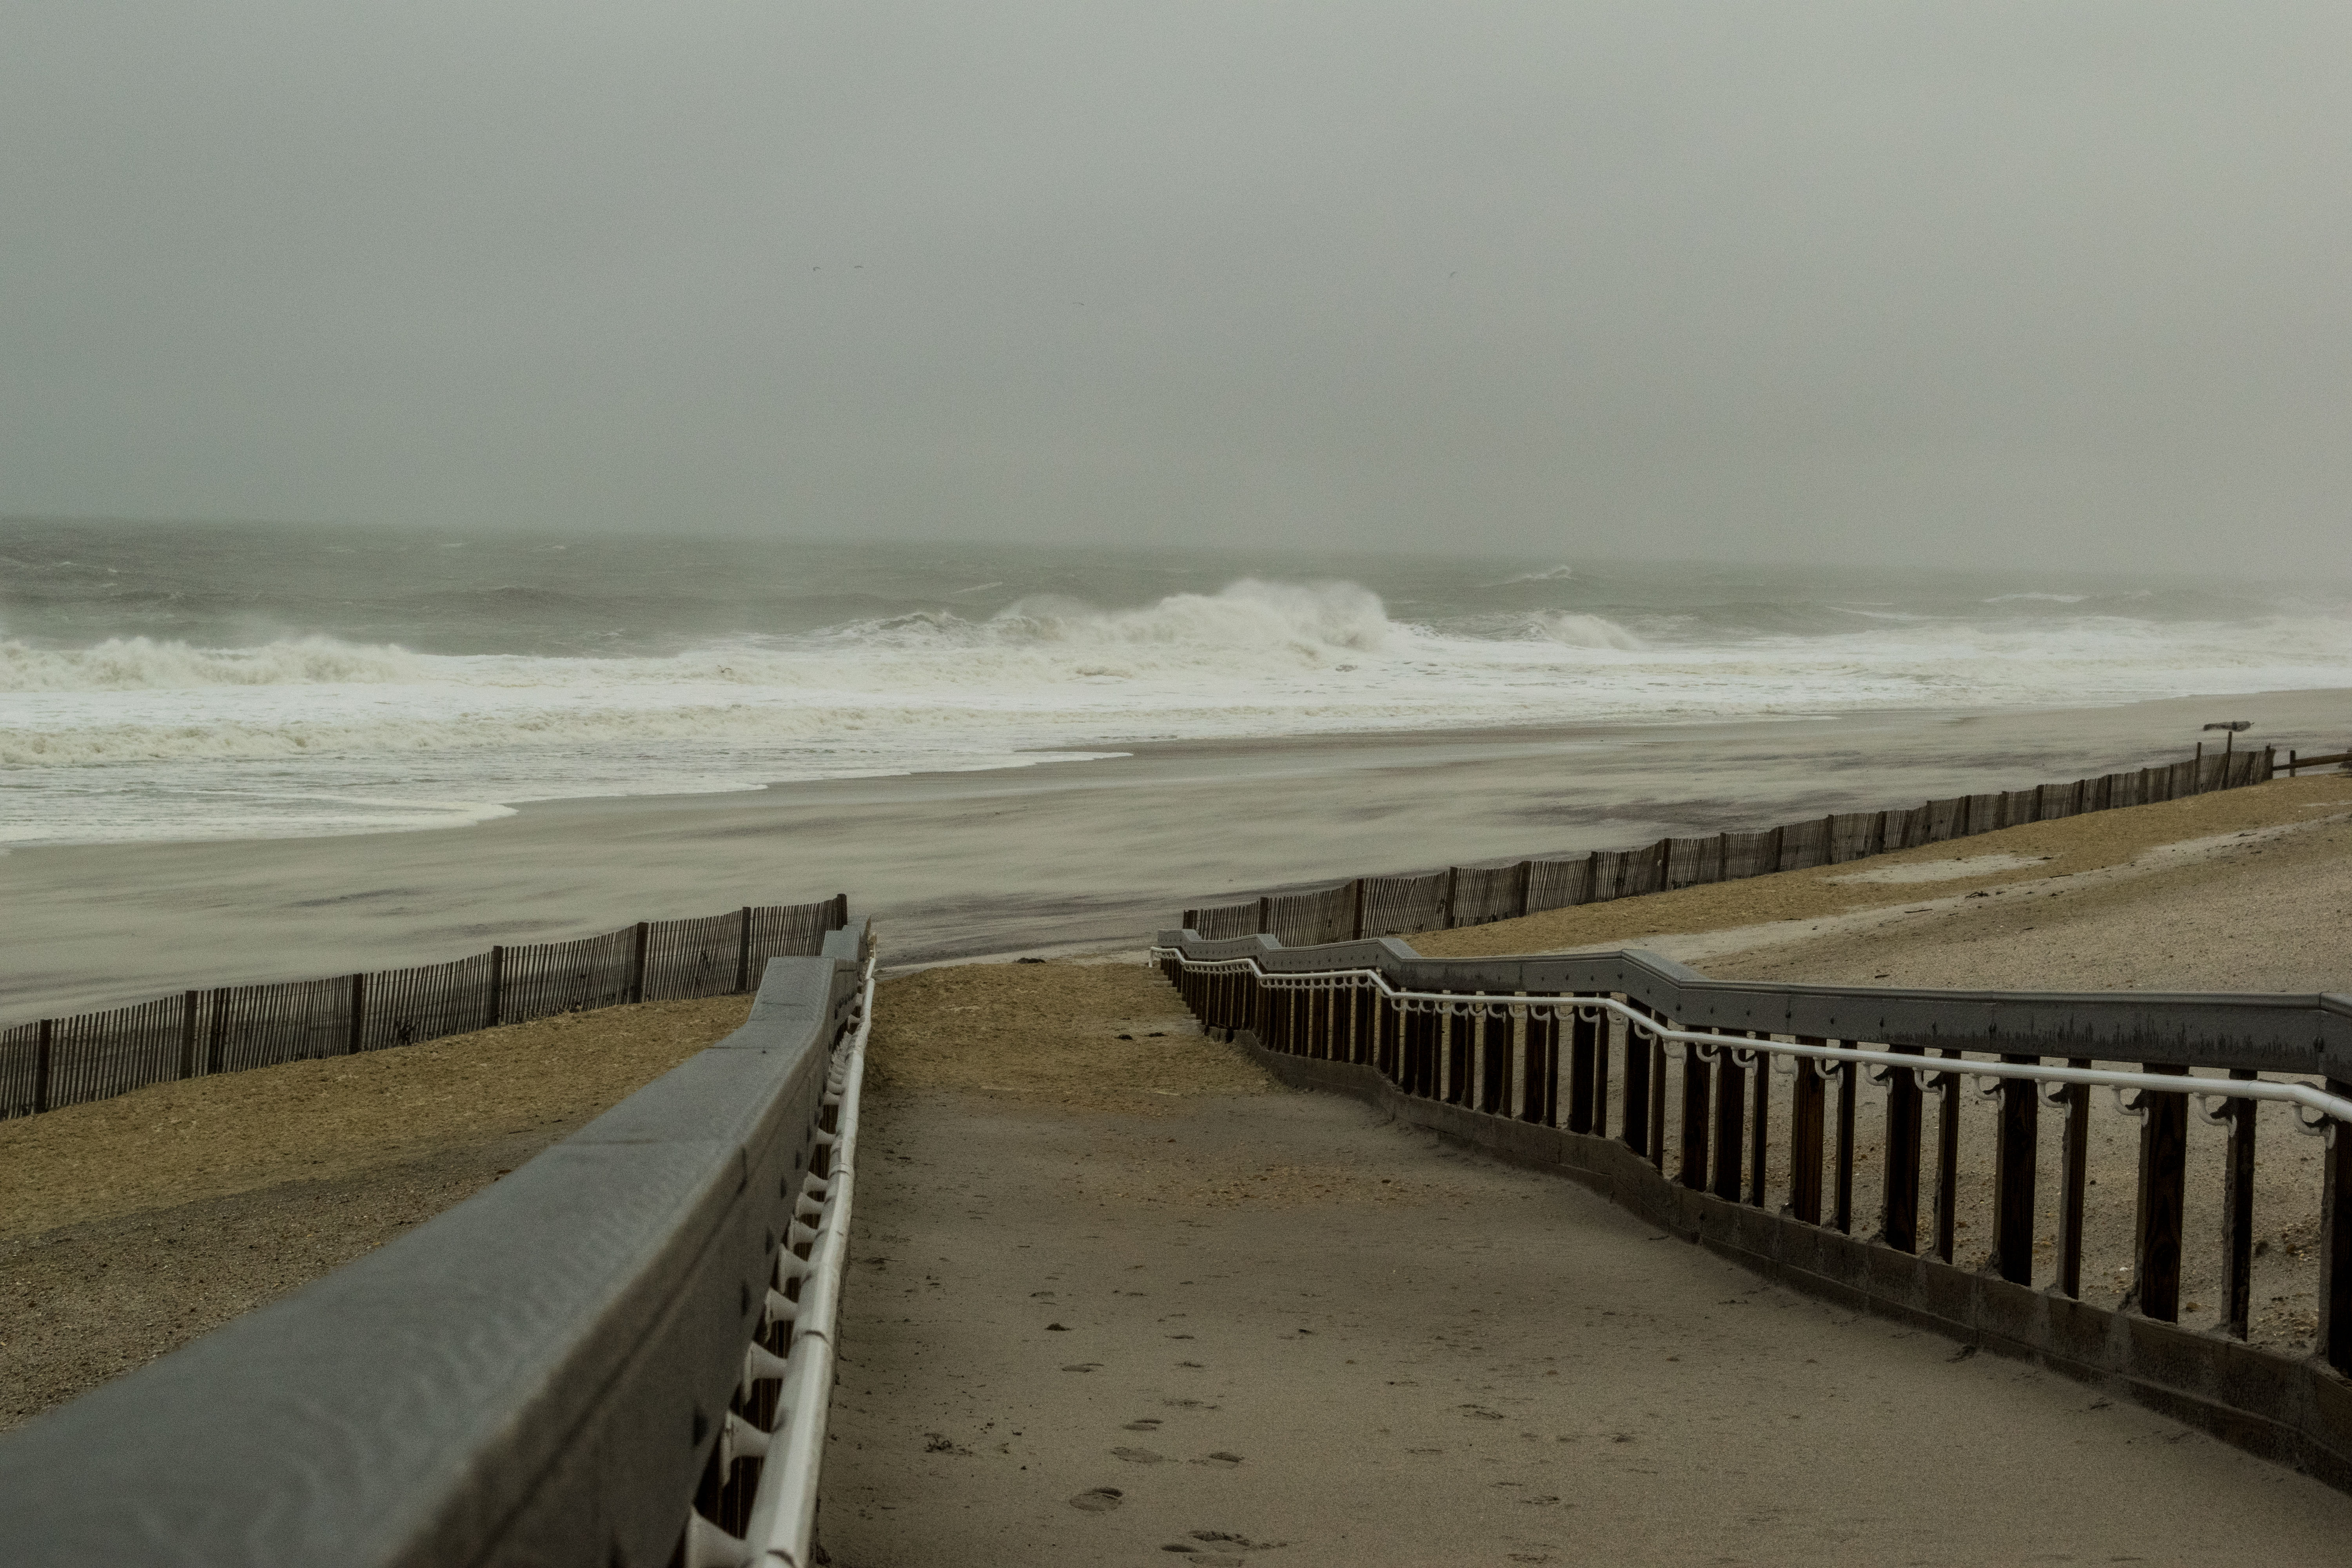 Waves crash at Brick Beach III during the Oct. 27, 2018 nor'easter. (Photo: Daniel Nee)